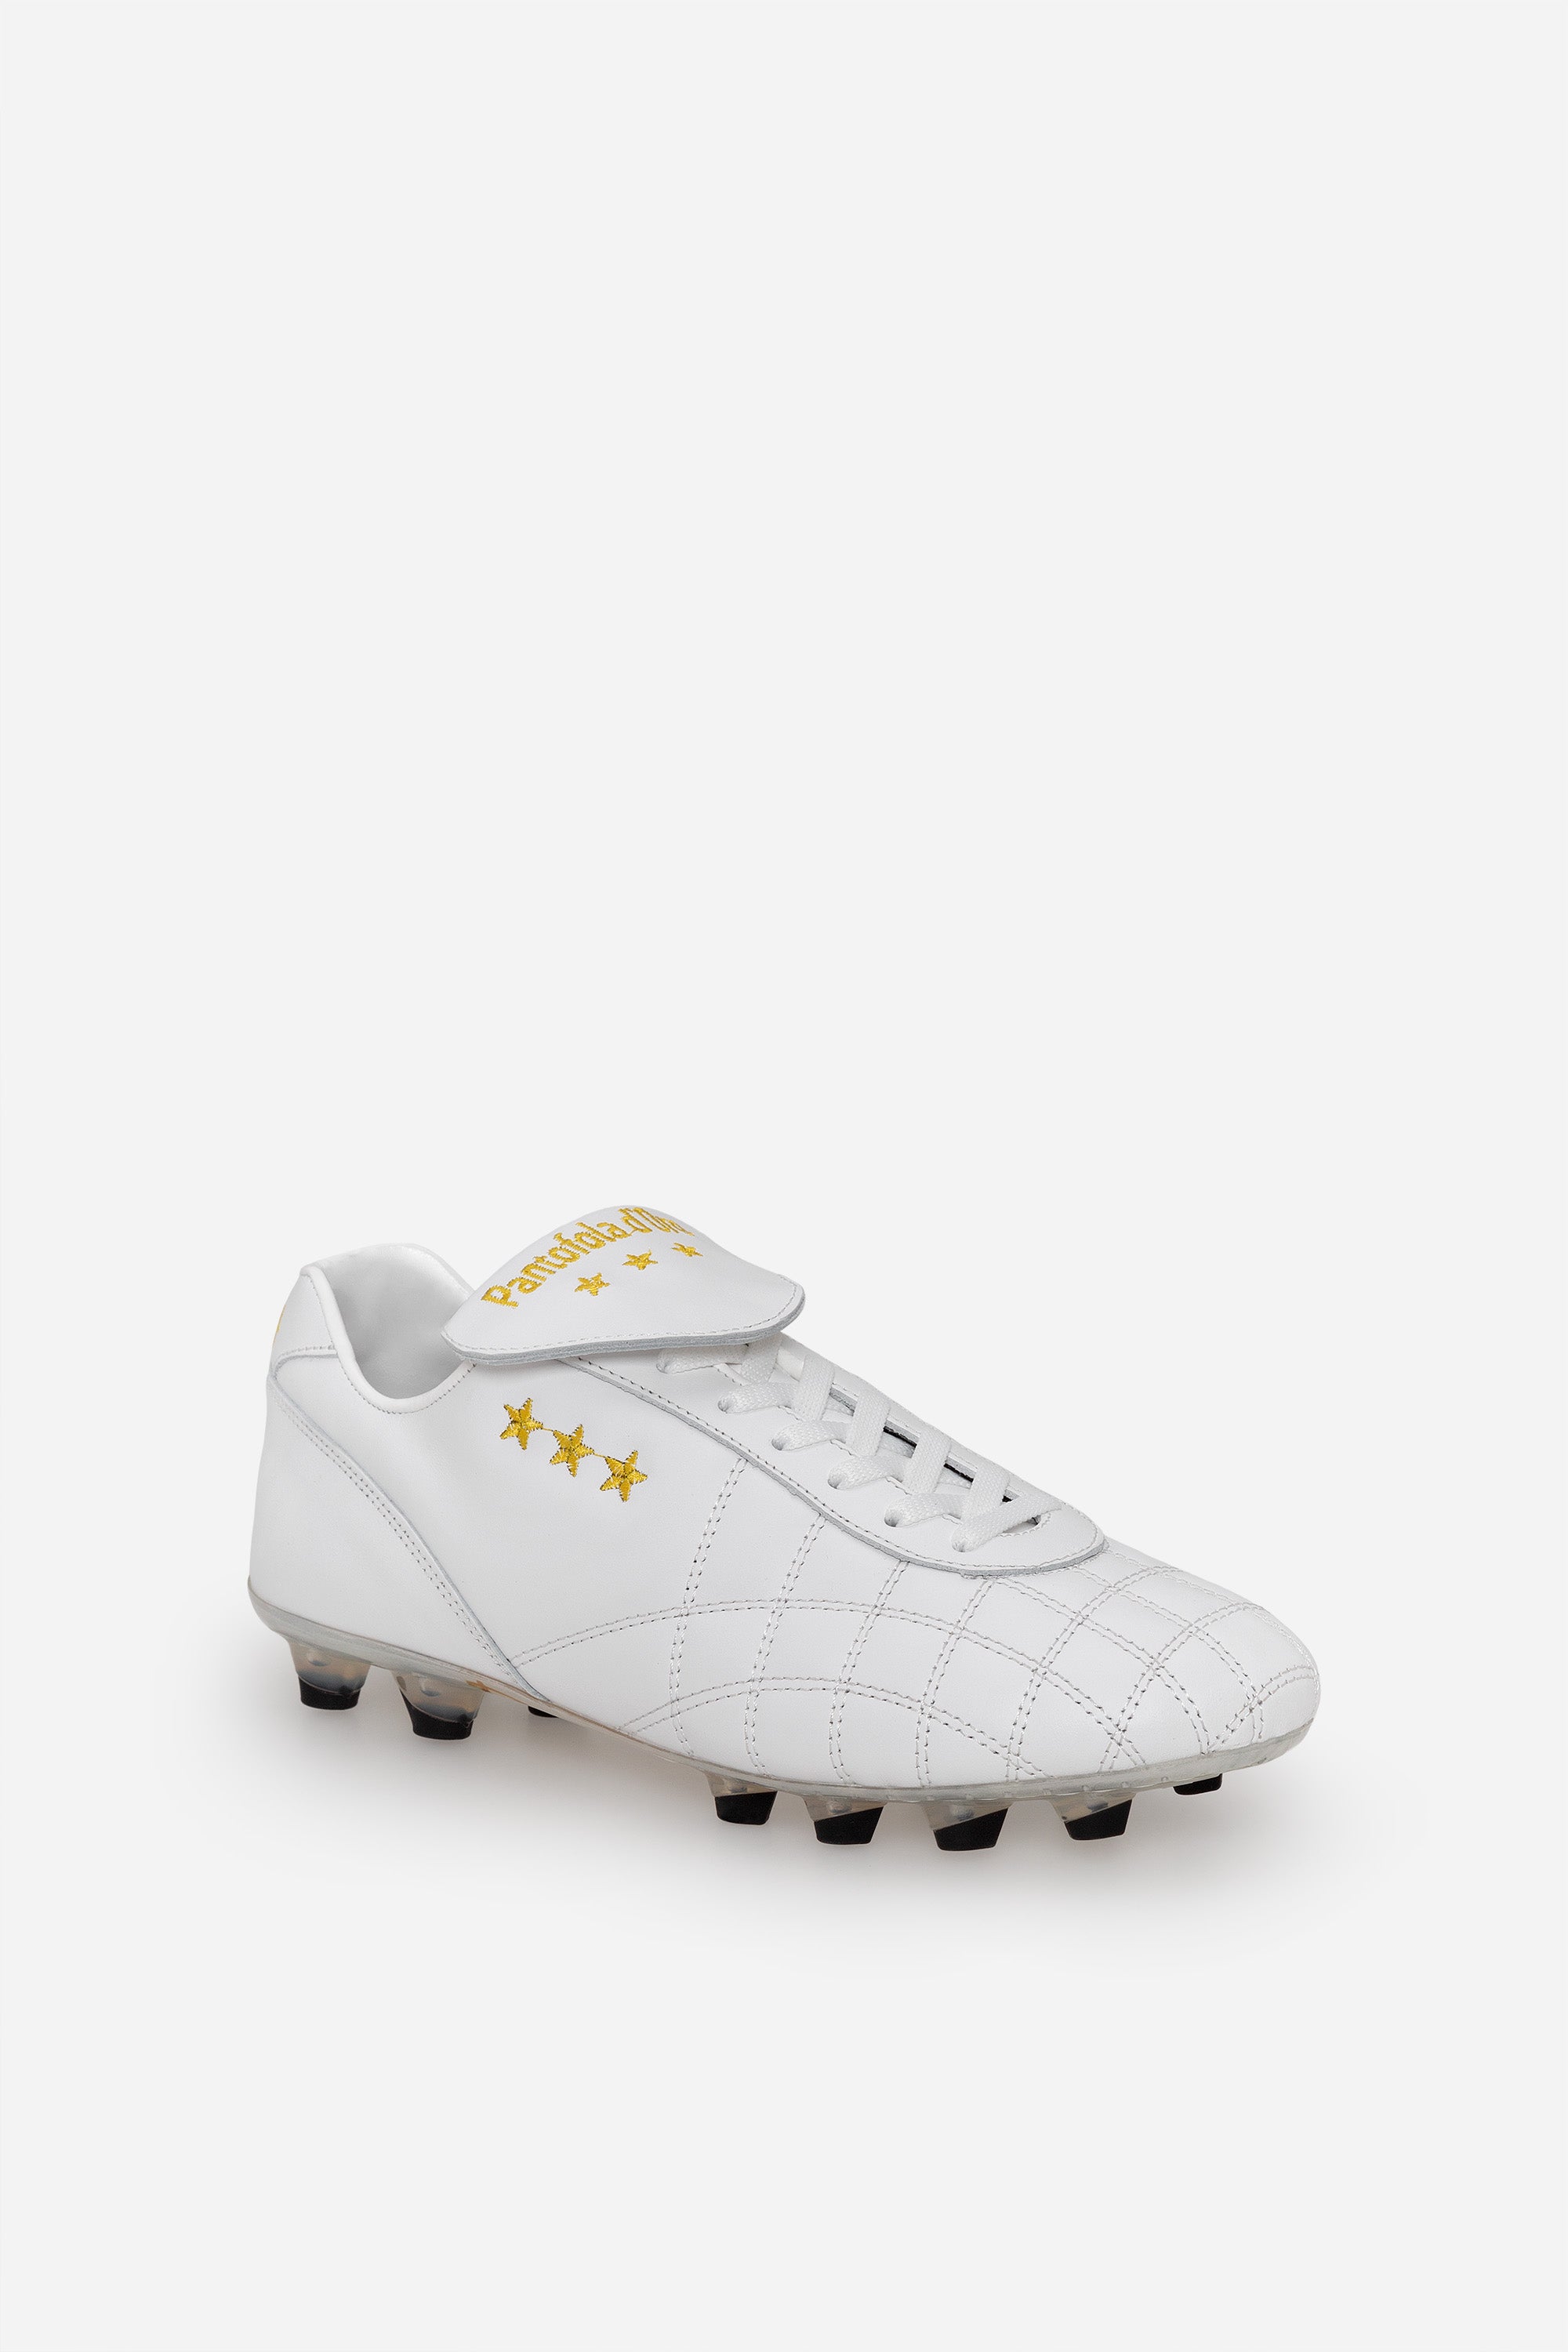 Pantofola d'Oro Del Duca Leather Football Boot